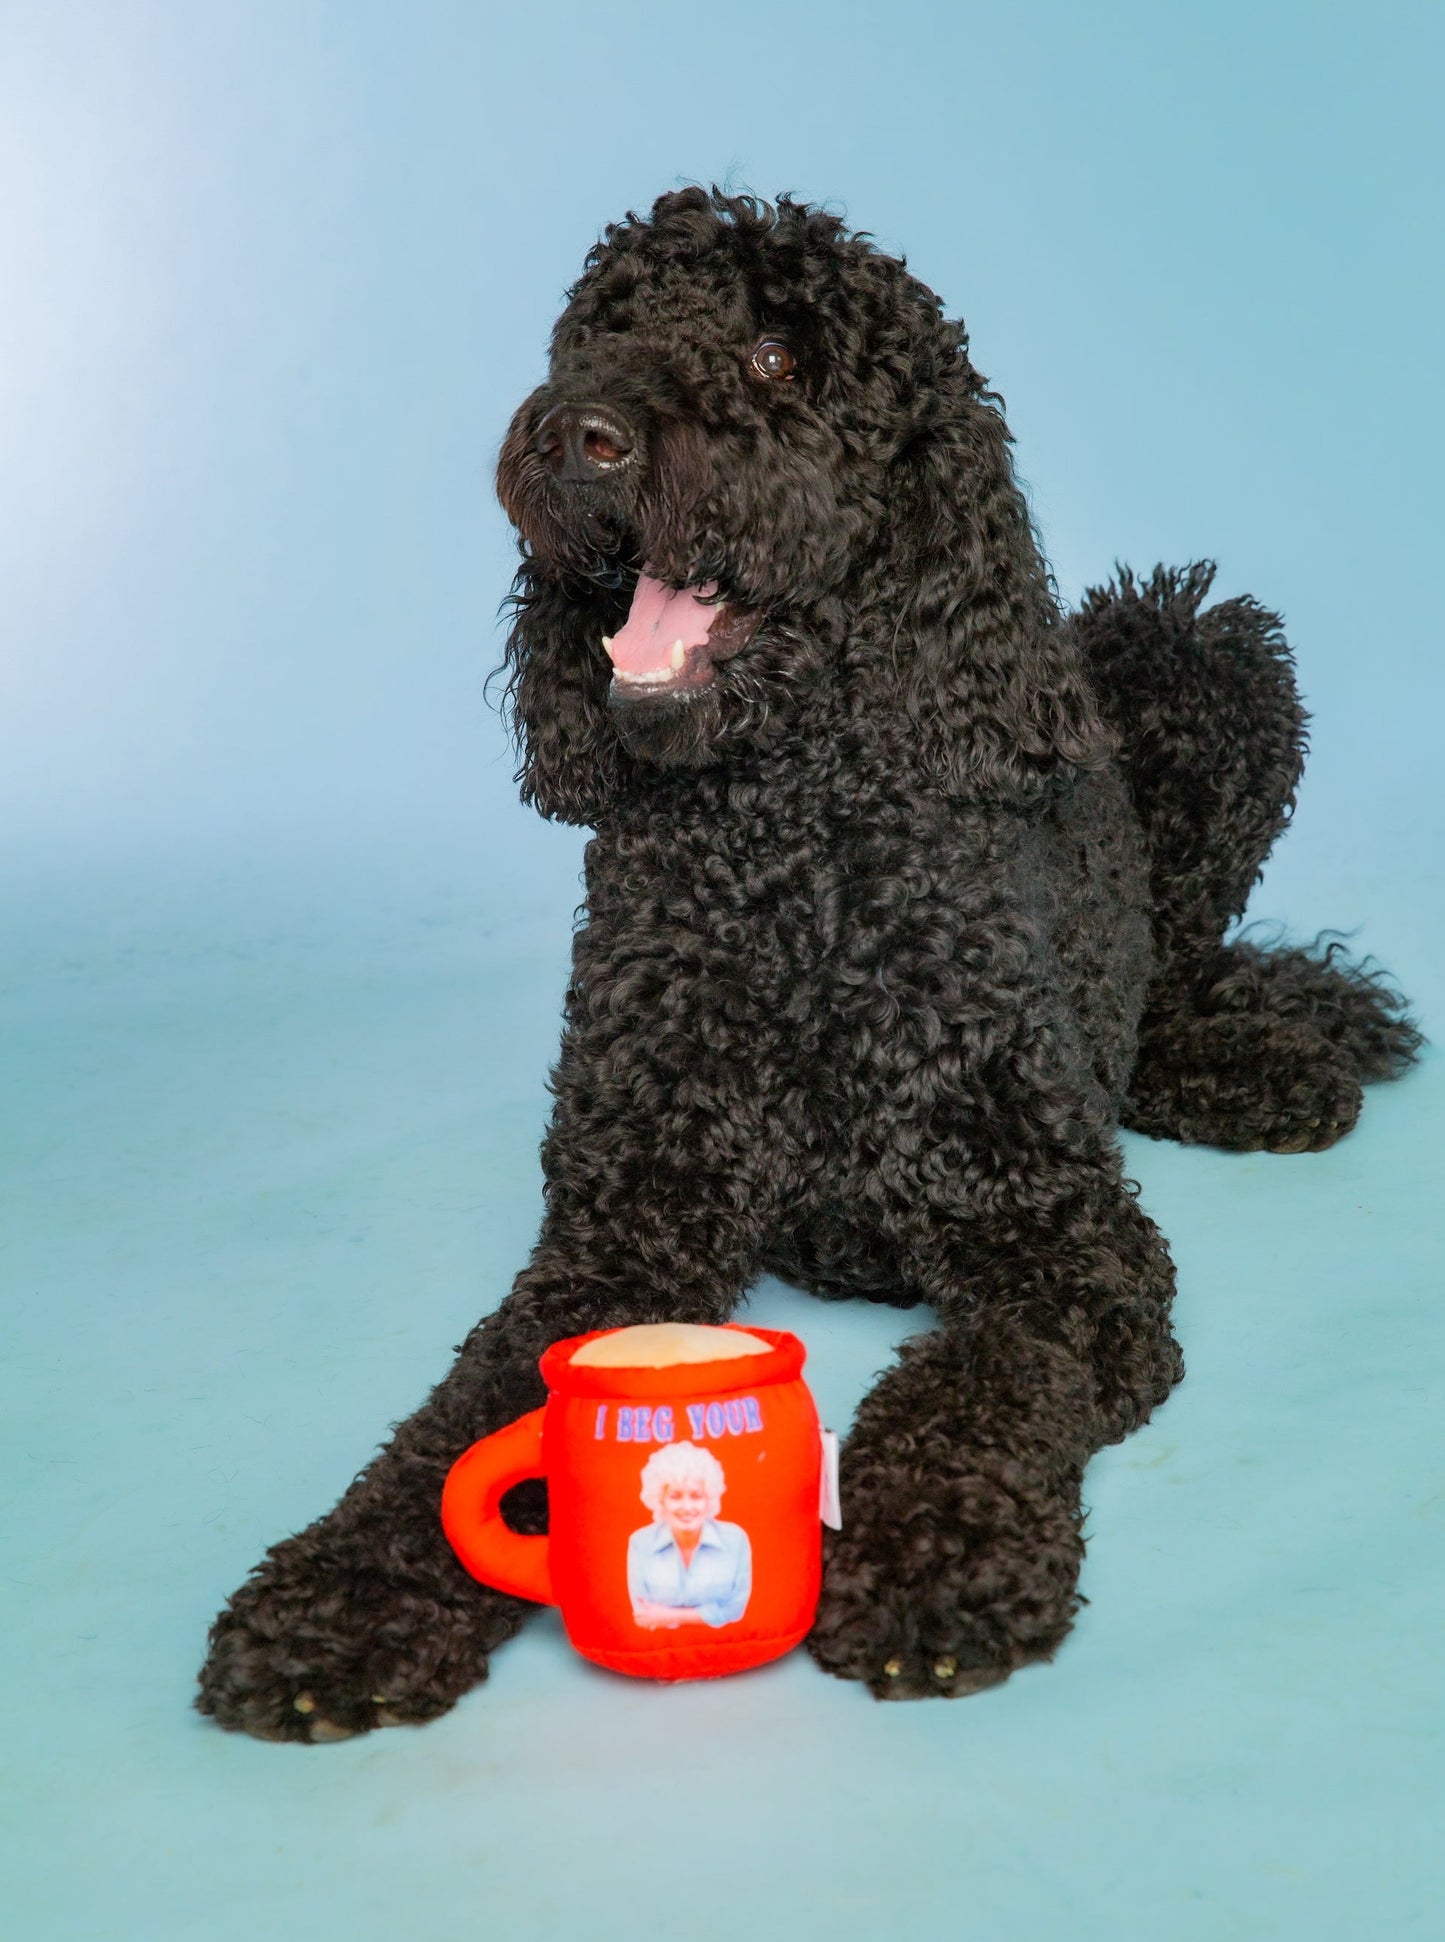 I Beg Your Parton Red Coffee Mug Plush Dog Squeaky Toy